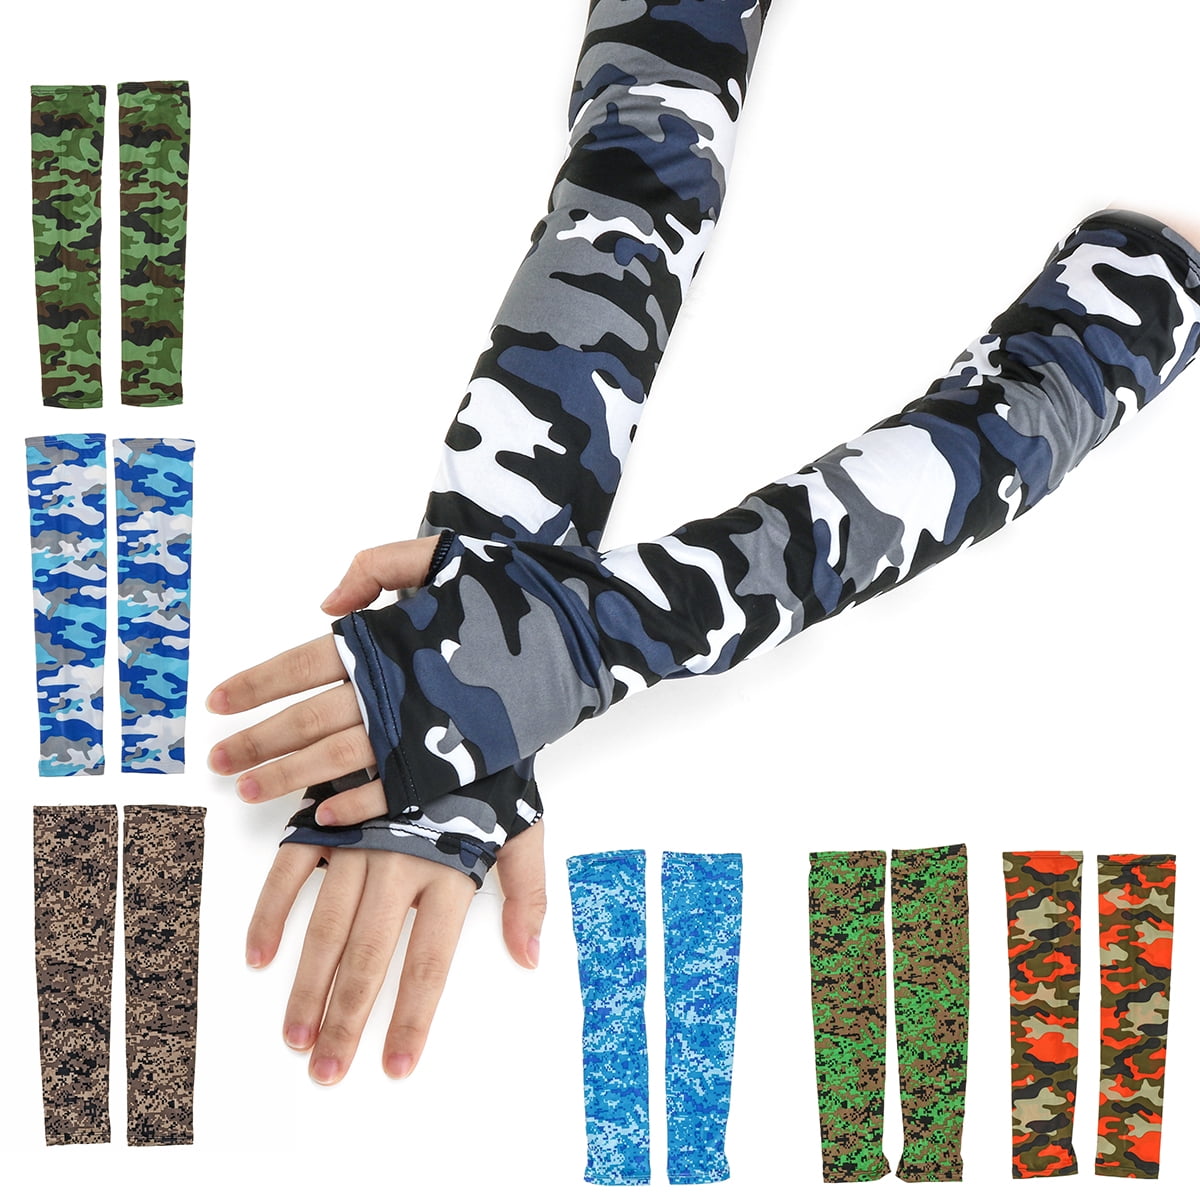 Cooling Arm Sleeves Cover Sport UV Sun Protection  Basketball Motorcycle Unisex 